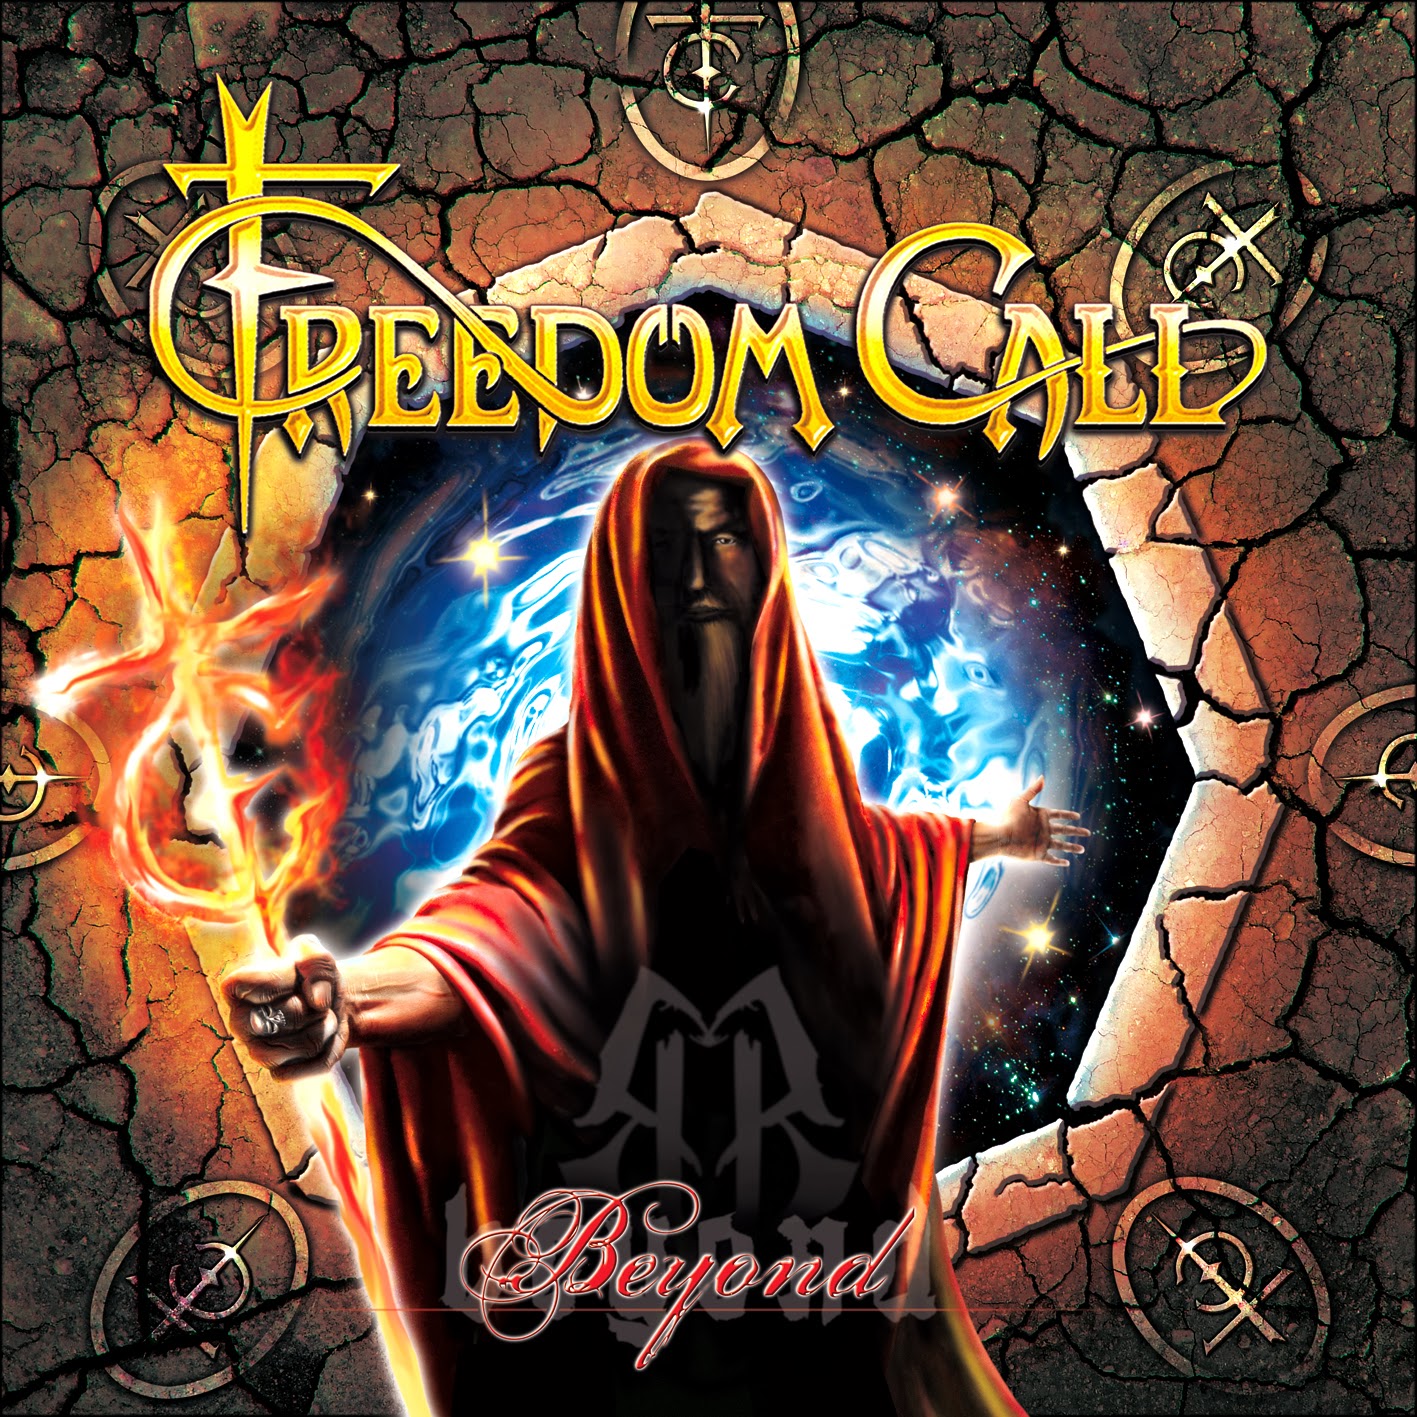 News Added Jan 21, 2014 German melodic metallers FREEDOM CALL will release their new studio album, "Beyond", on February 24, 2014 in Europe and March 4 in North America via SPV/Steamhammer. The 14-song effort was recorded at Separate Studios in Nuremberg and FREEDOM CALL's own studio and was produced by guitarist/vocalist Chris Bay and Stephan […]